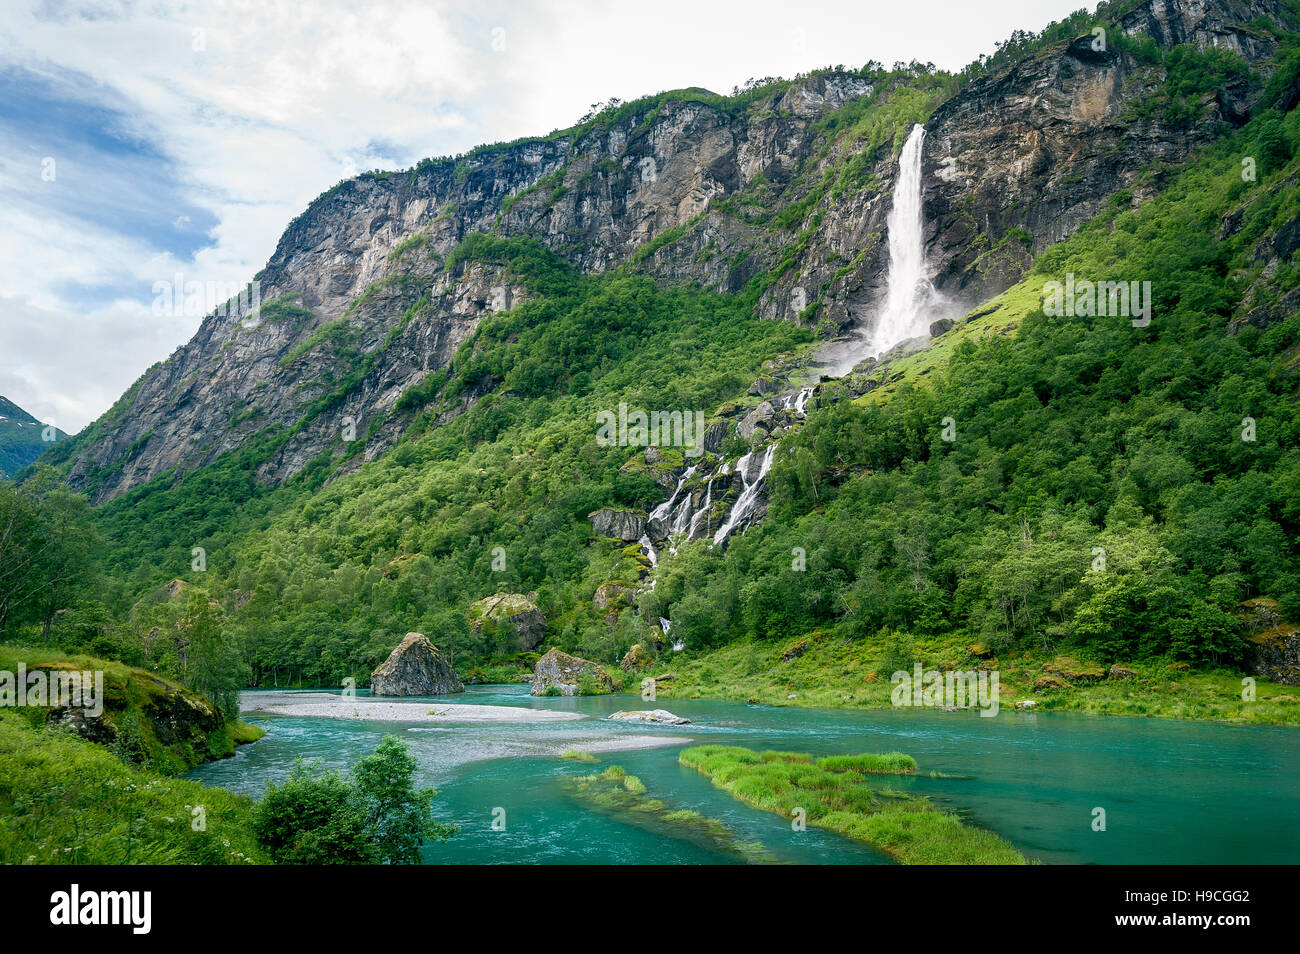 Norway landscape with waterfall in mountain river canyon. Stock Photo